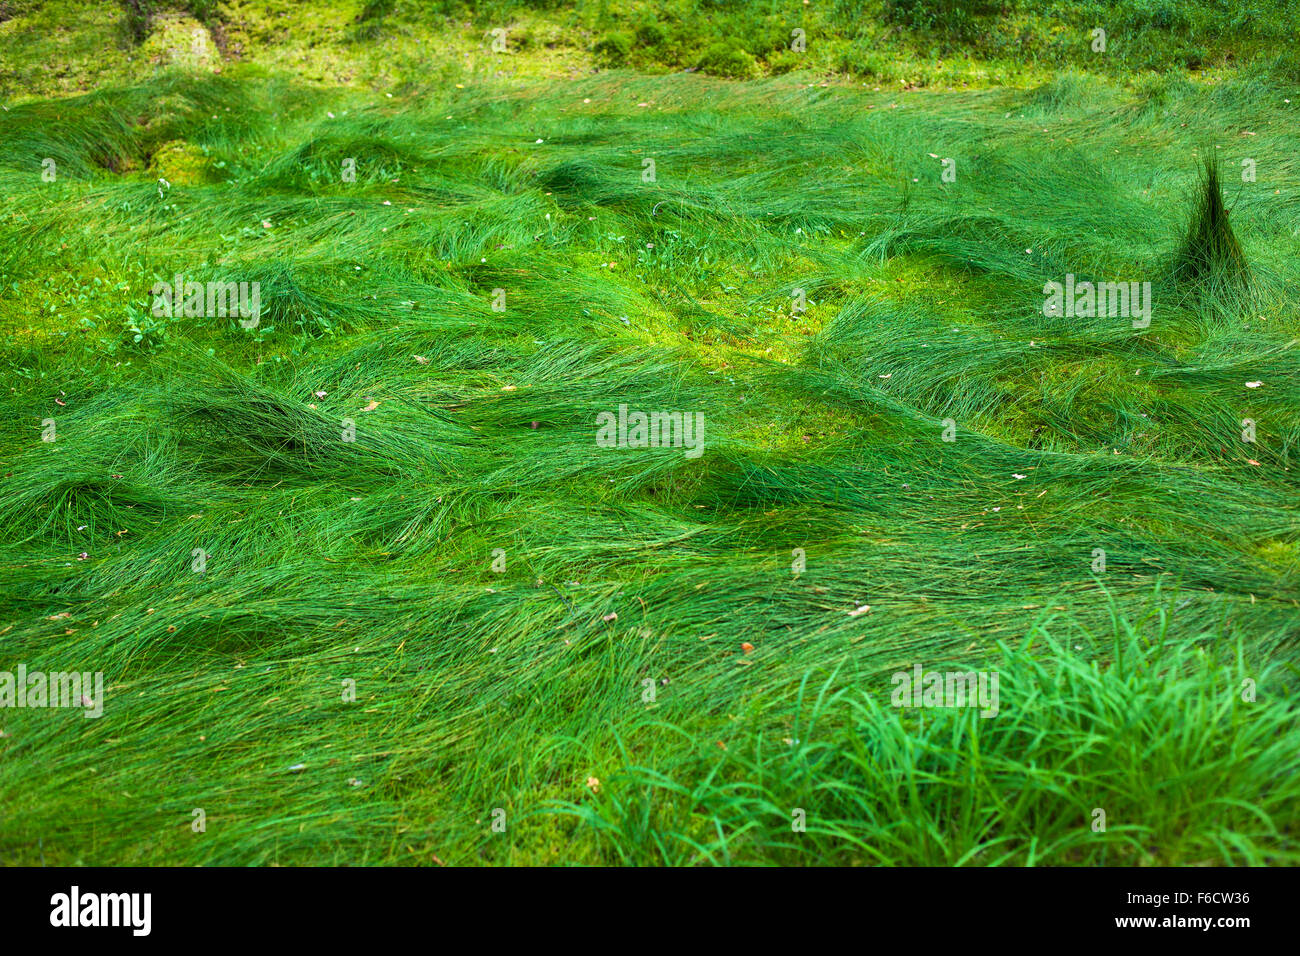 Wild grass in forest. Vibrant green colors. Stock Photo